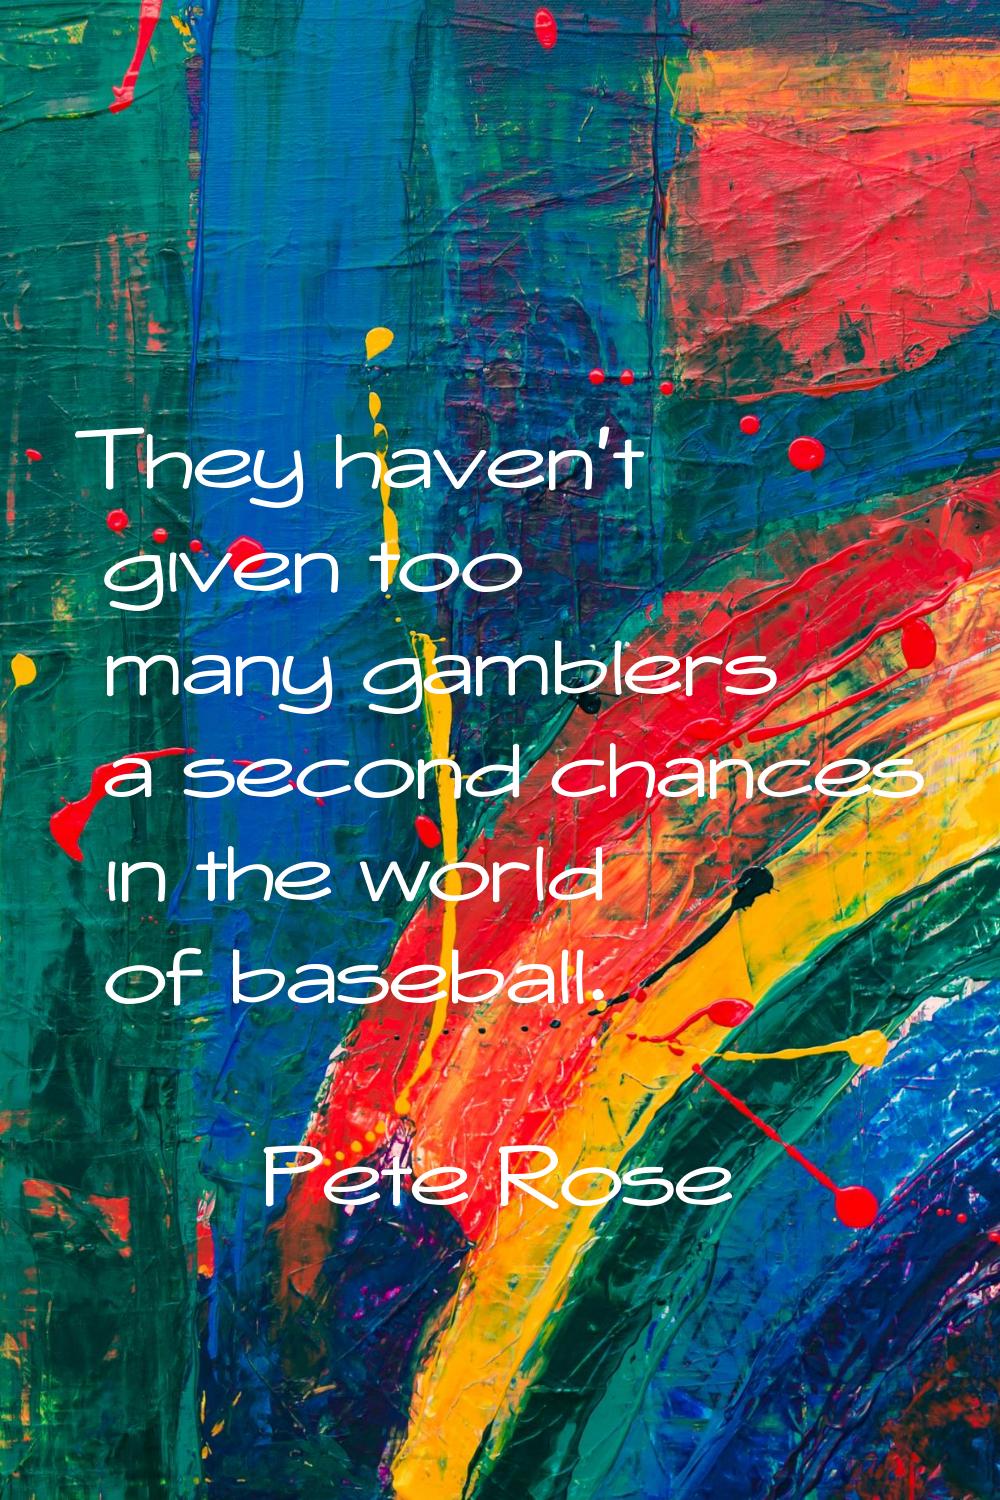 They haven't given too many gamblers a second chances in the world of baseball.